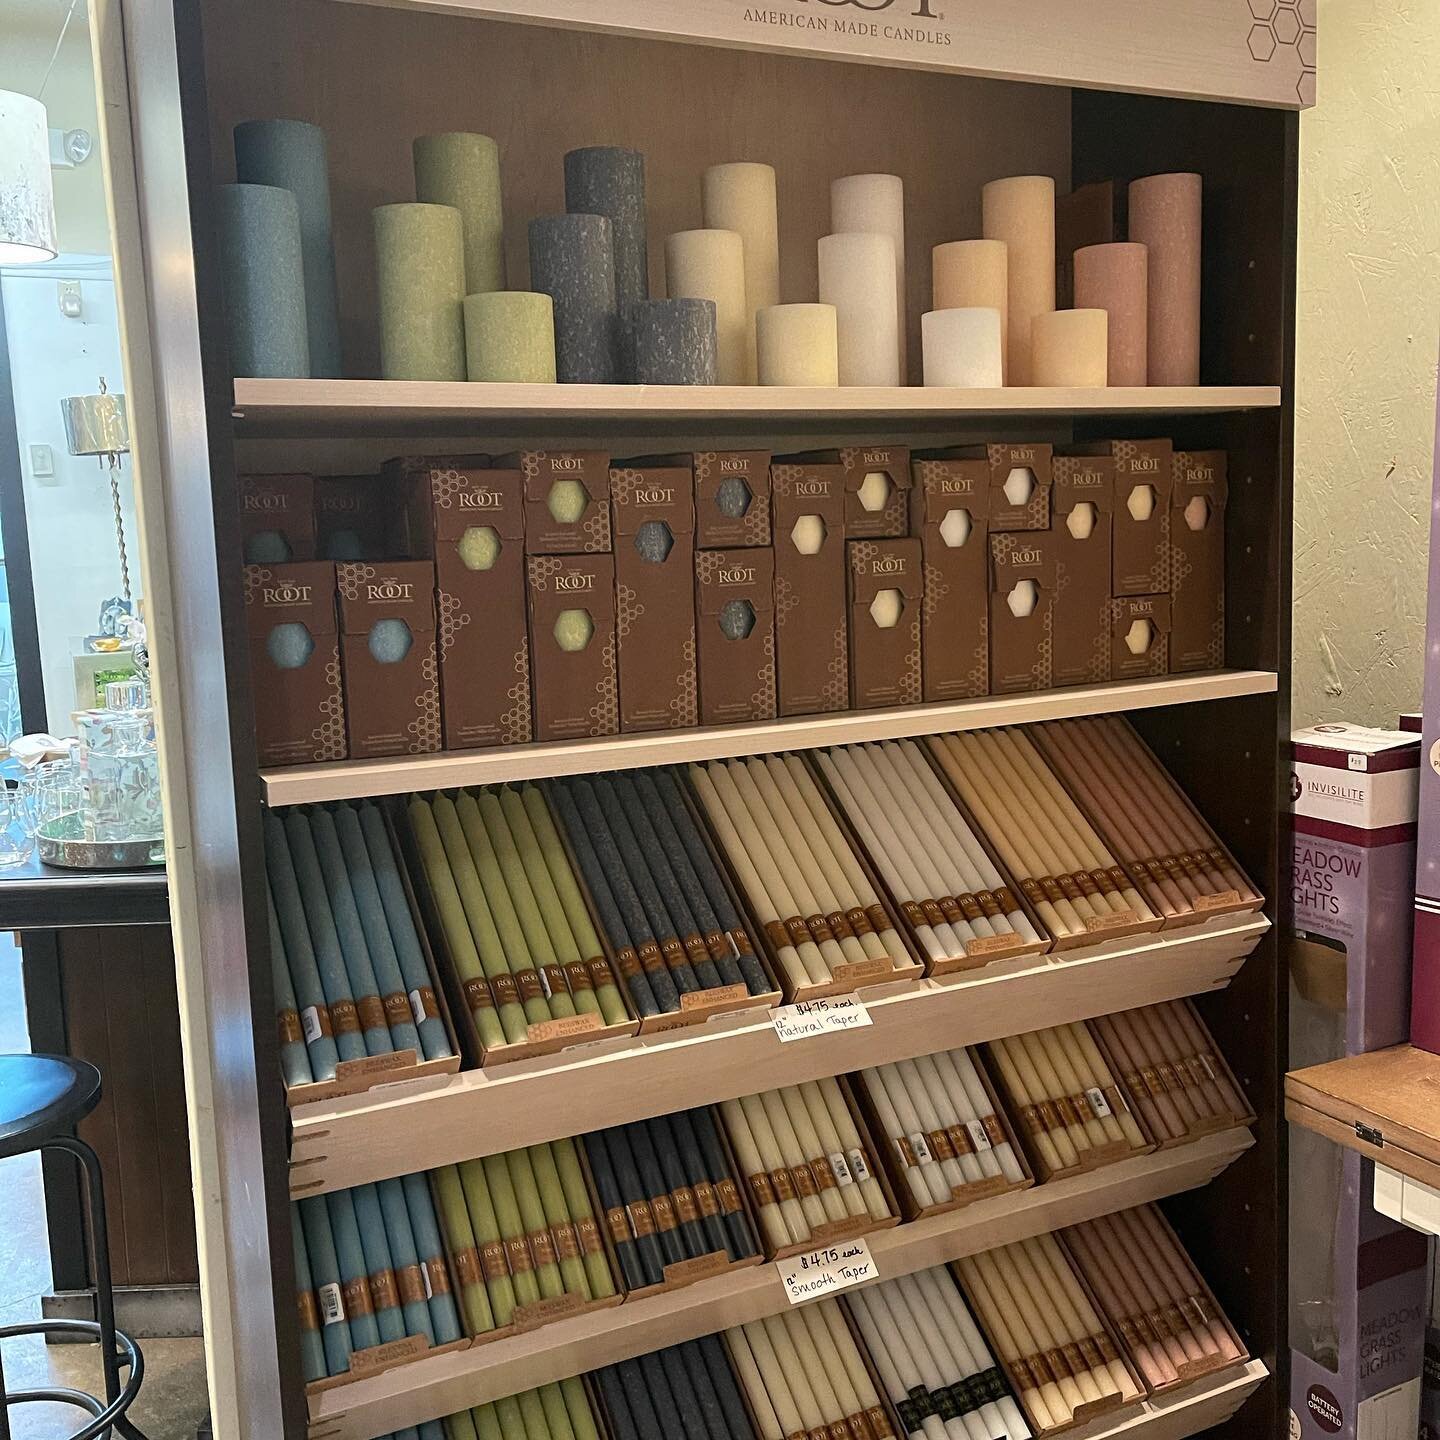 New candle line!!! ROOT CANDLES Beautiful colors and all the different sizes you&rsquo;d need!! #rootcandles #americanmade #beeswaxcandles #shoplocal #athensga #shopaim